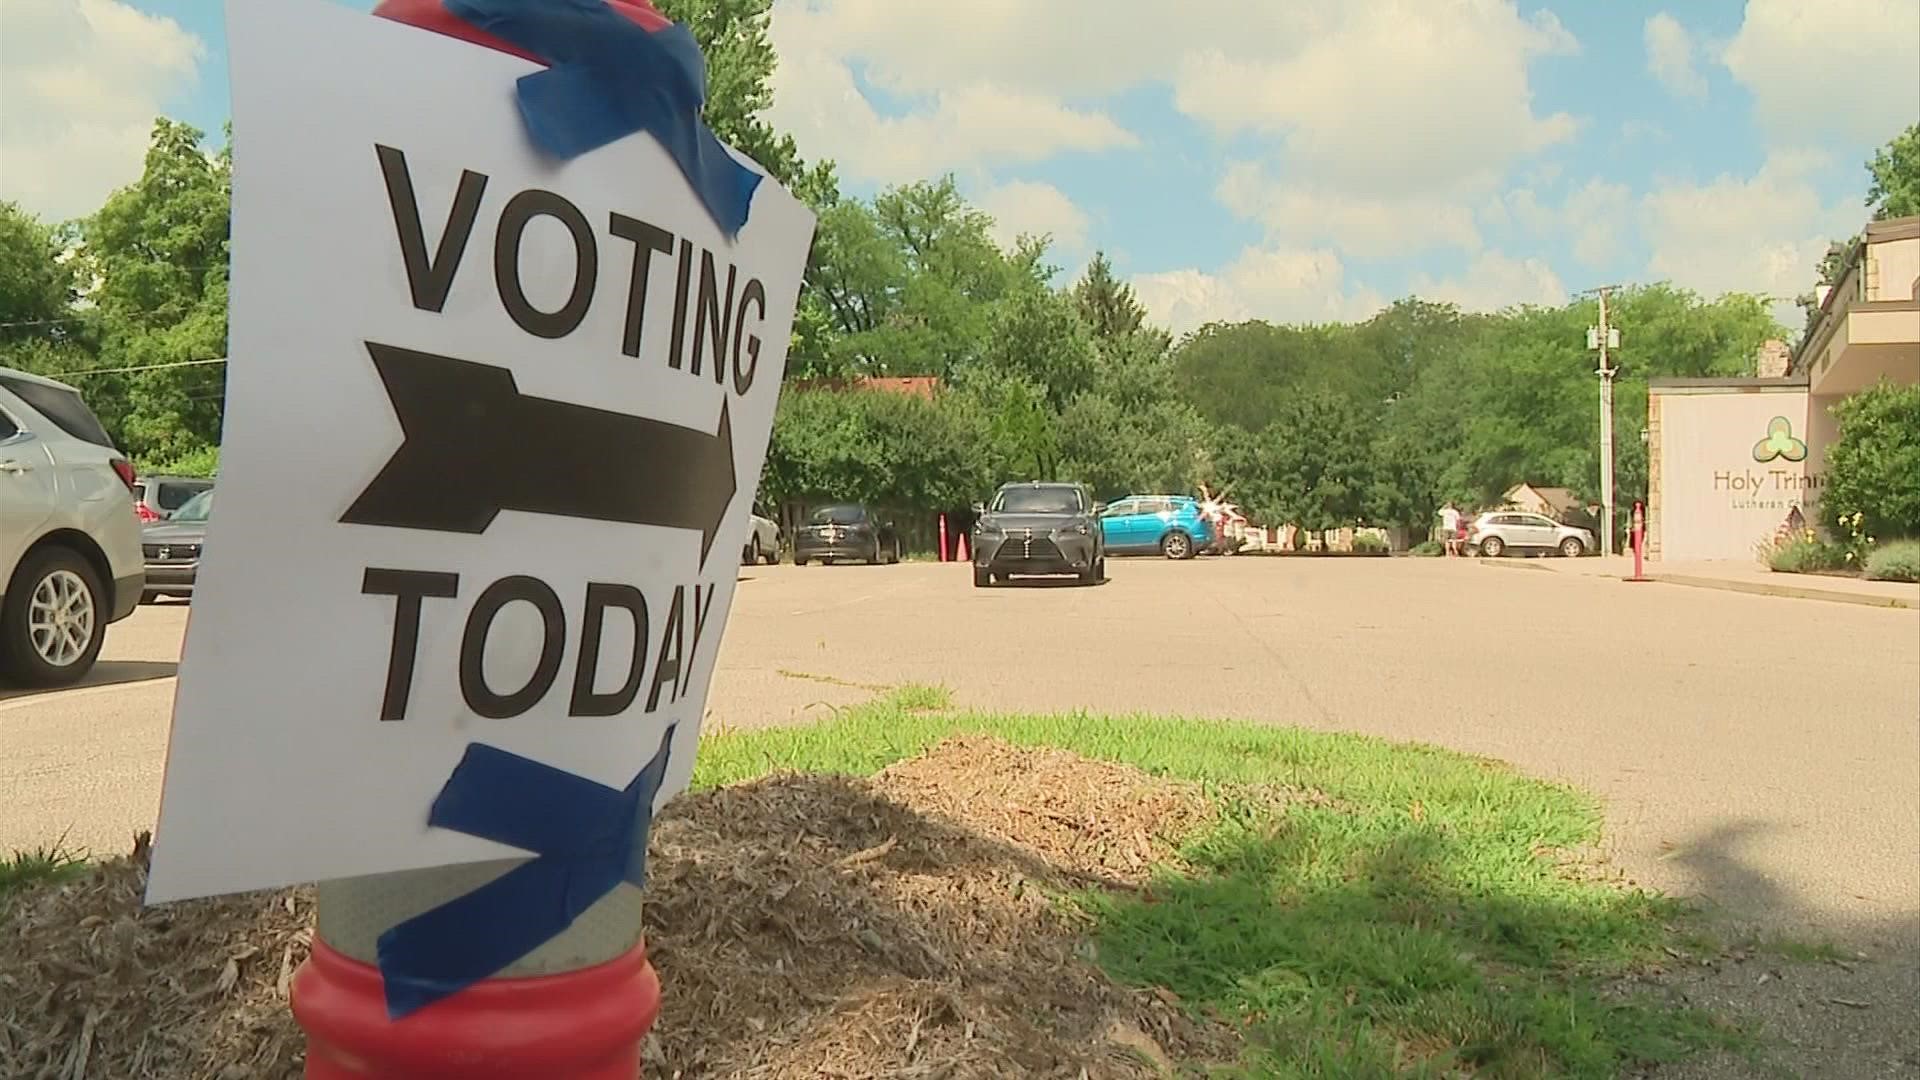 Historically, the lowest turnout in Franklin County was 4% in May 2013.